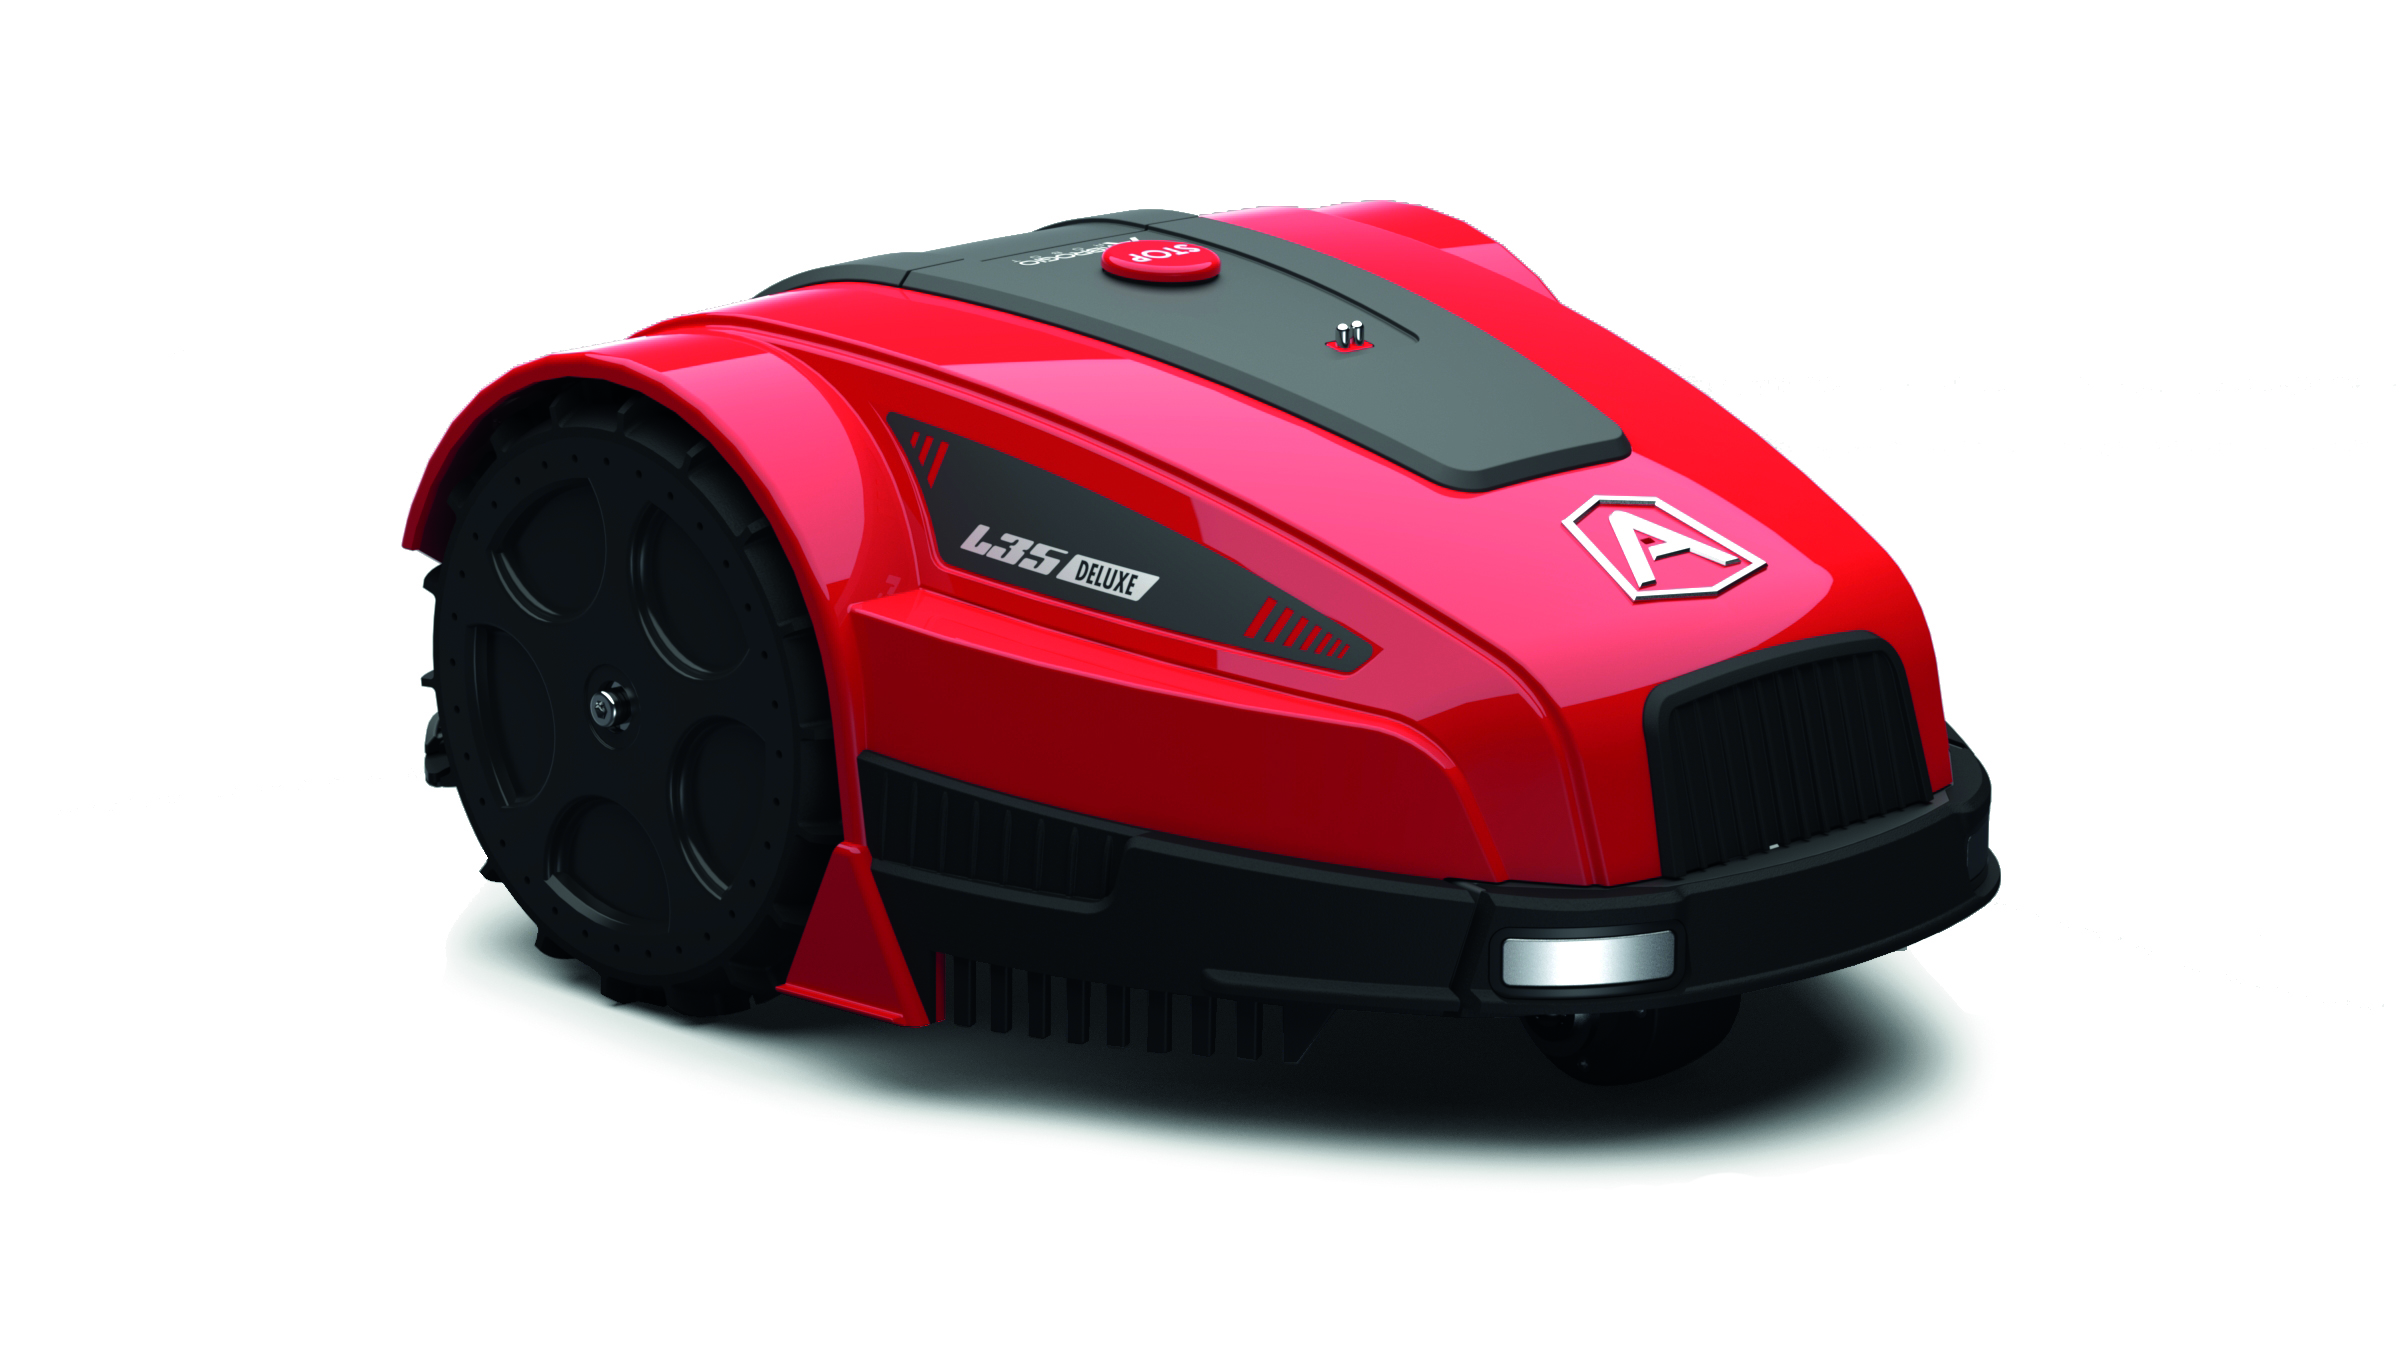 Ambrogio L35 Deluxe Robotic Lawnmower- up to 1800m2 - GPS GSM 5Ah Lithium-Ion